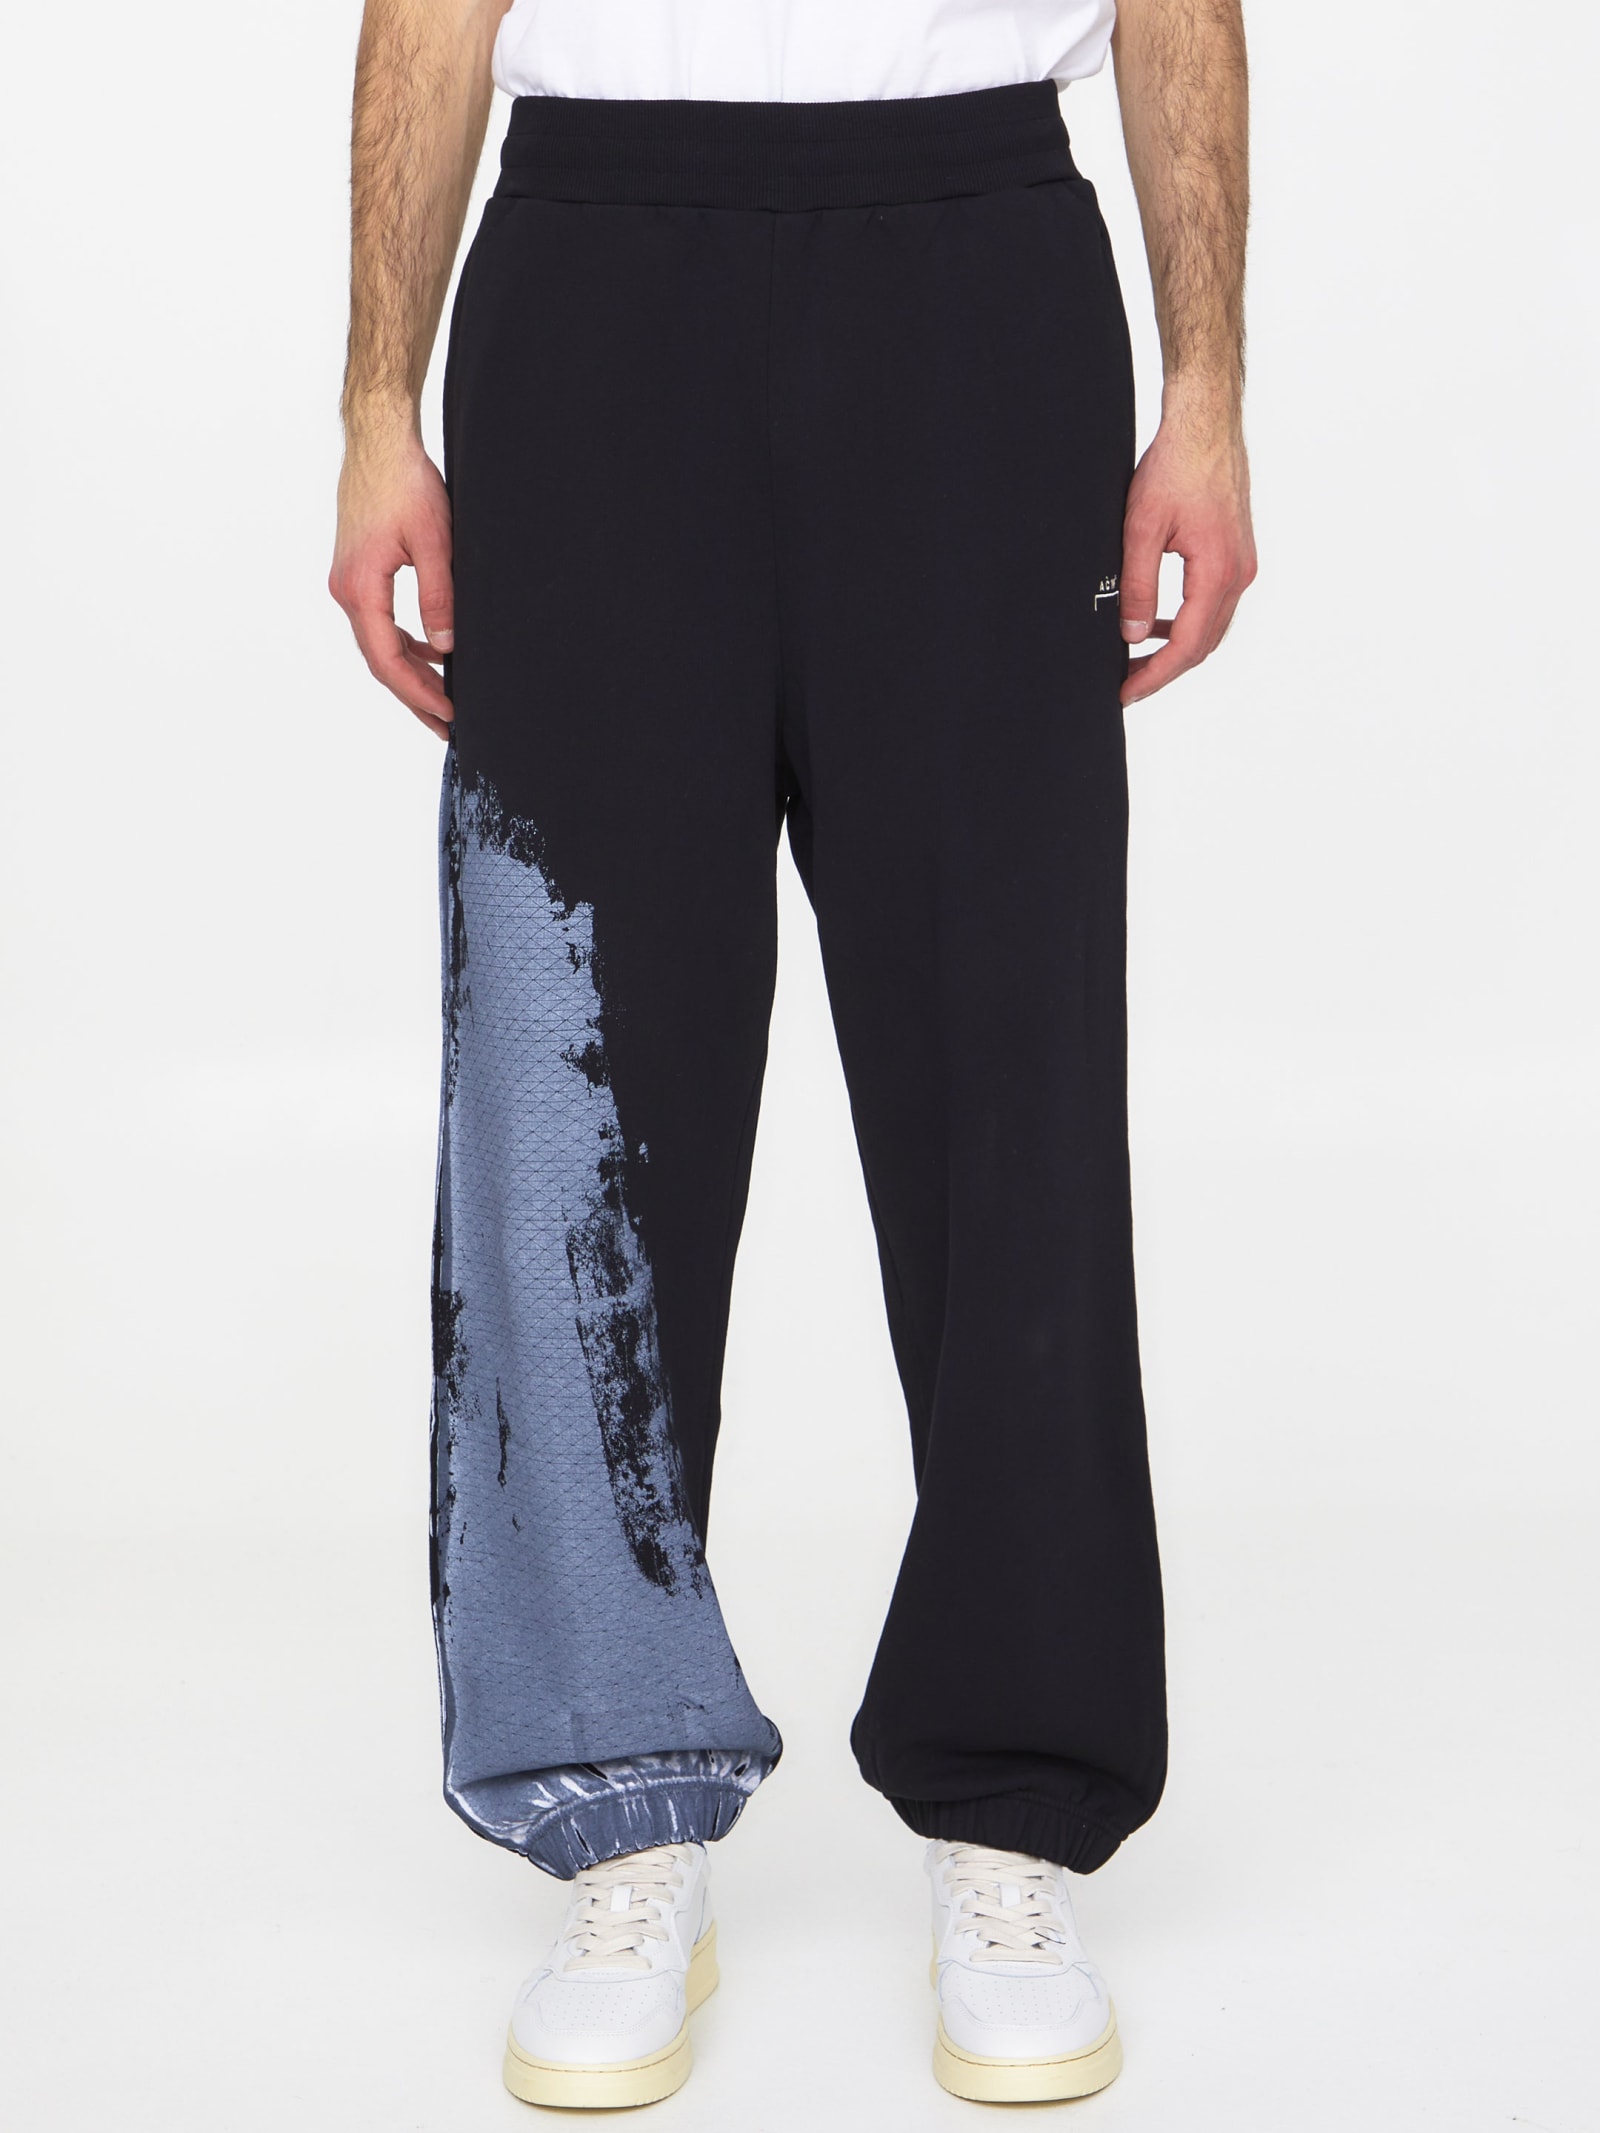 A-COLD-WALL* BRUSHSTROKE TRACK PANTS